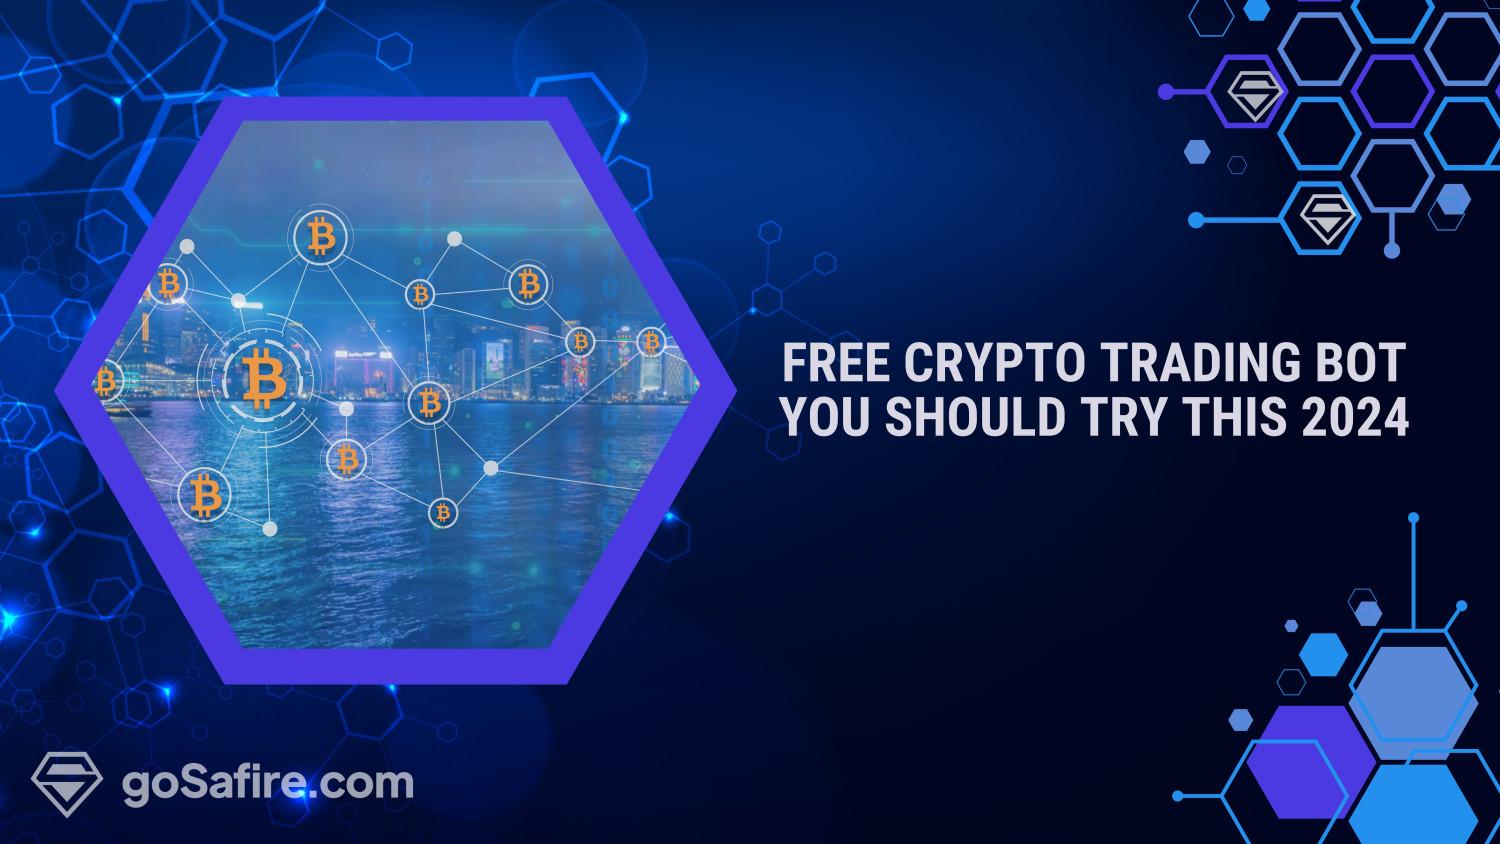 Free Crypto Trading Bot You Should Try this 2024